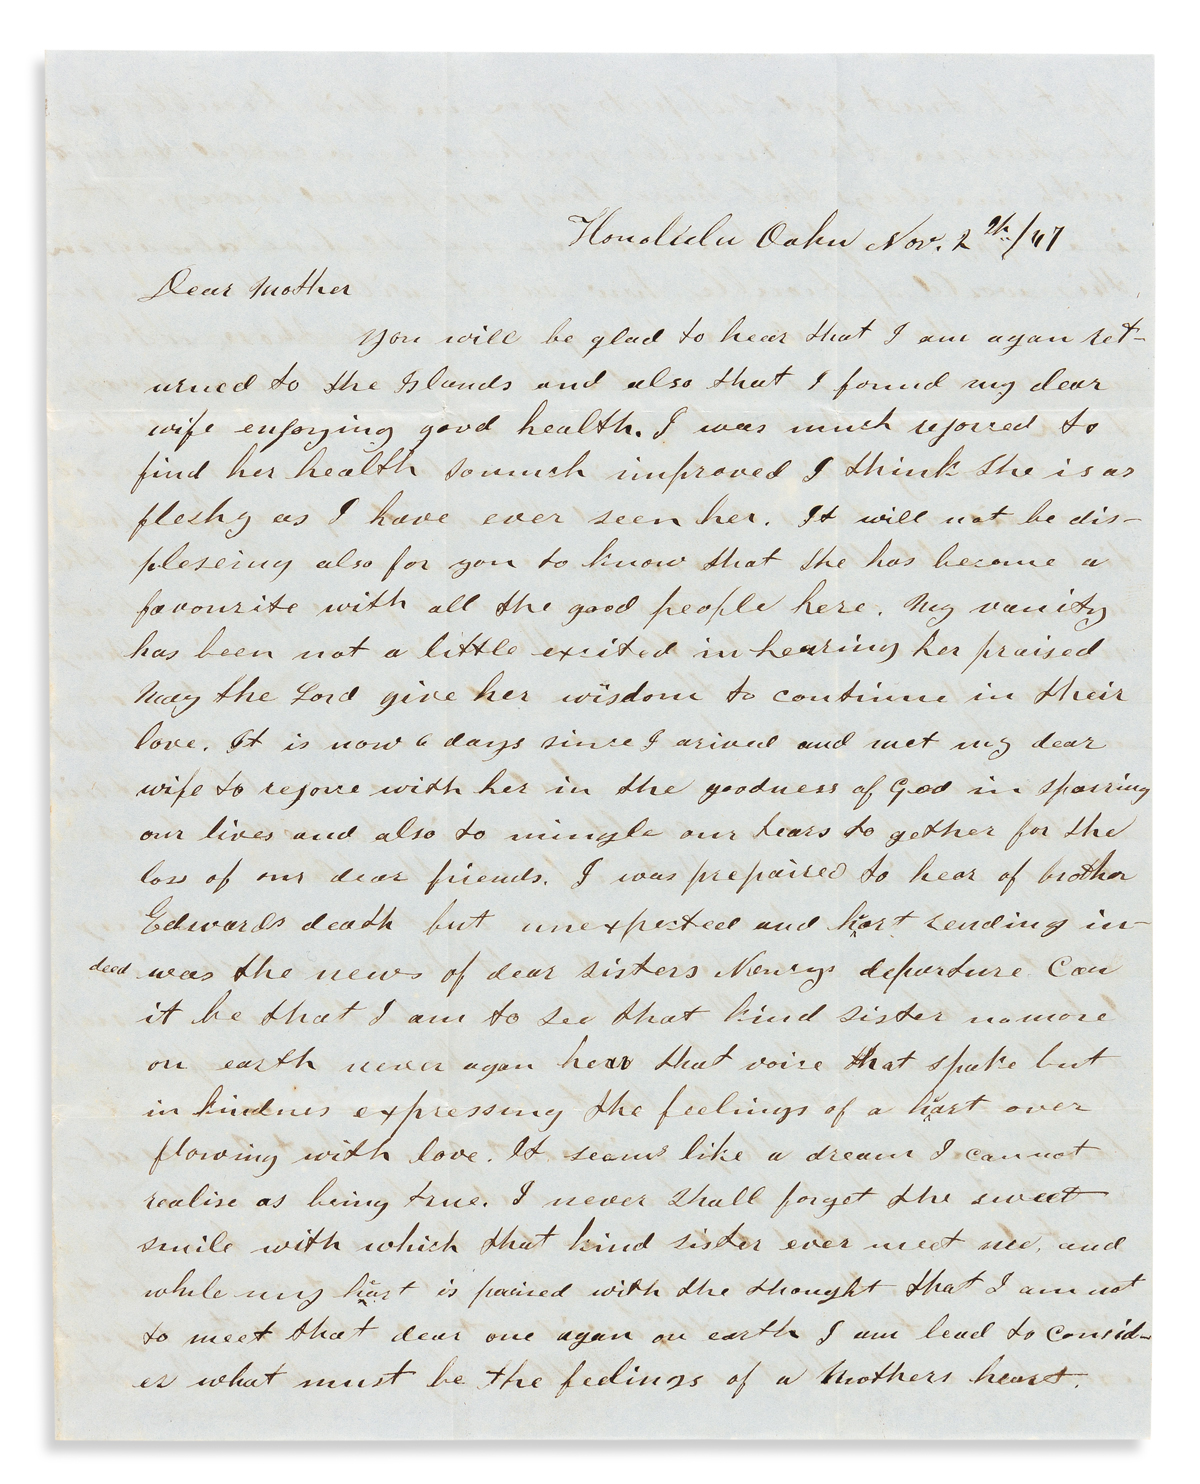 Russell, Jane (1819-1914) Archive of Letters, 1840s. Written during a Whaling Voyage, from Hawaii, and Other Ports.